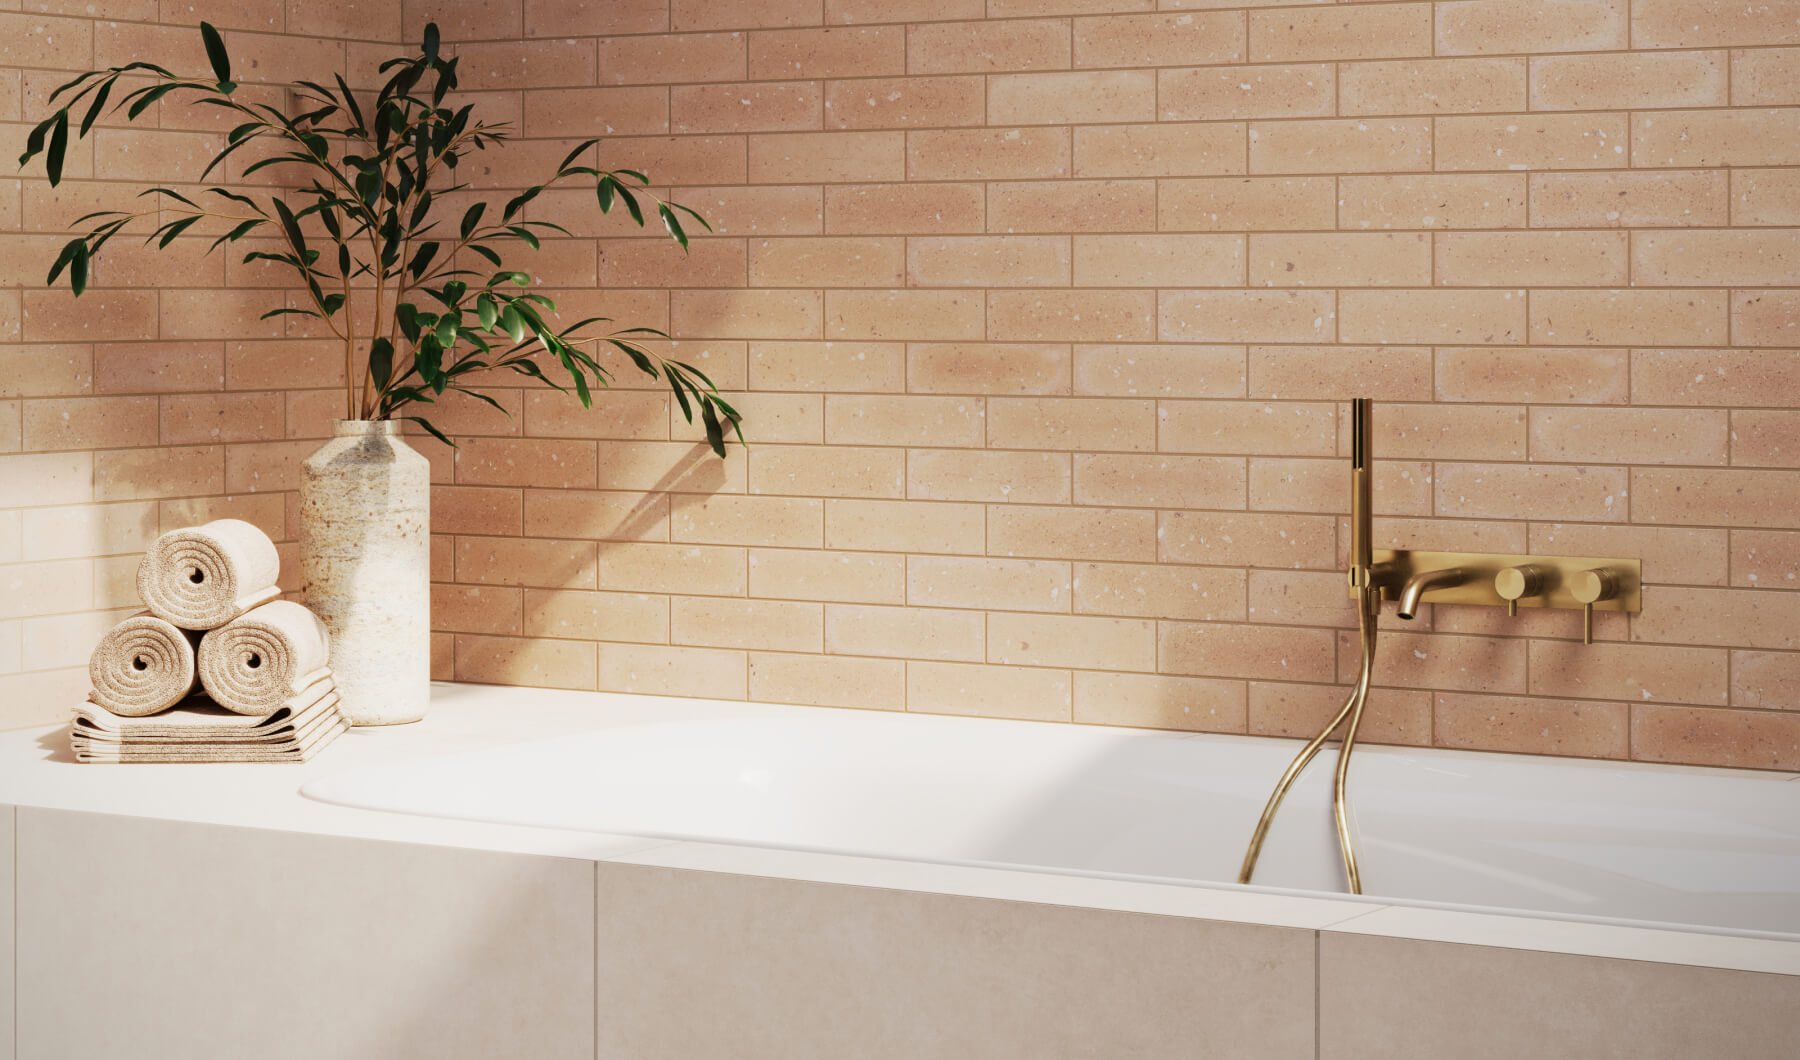 Warm terracotta brick-look tiles create a cozy ambiance in a sunlit bathroom with gold fixtures